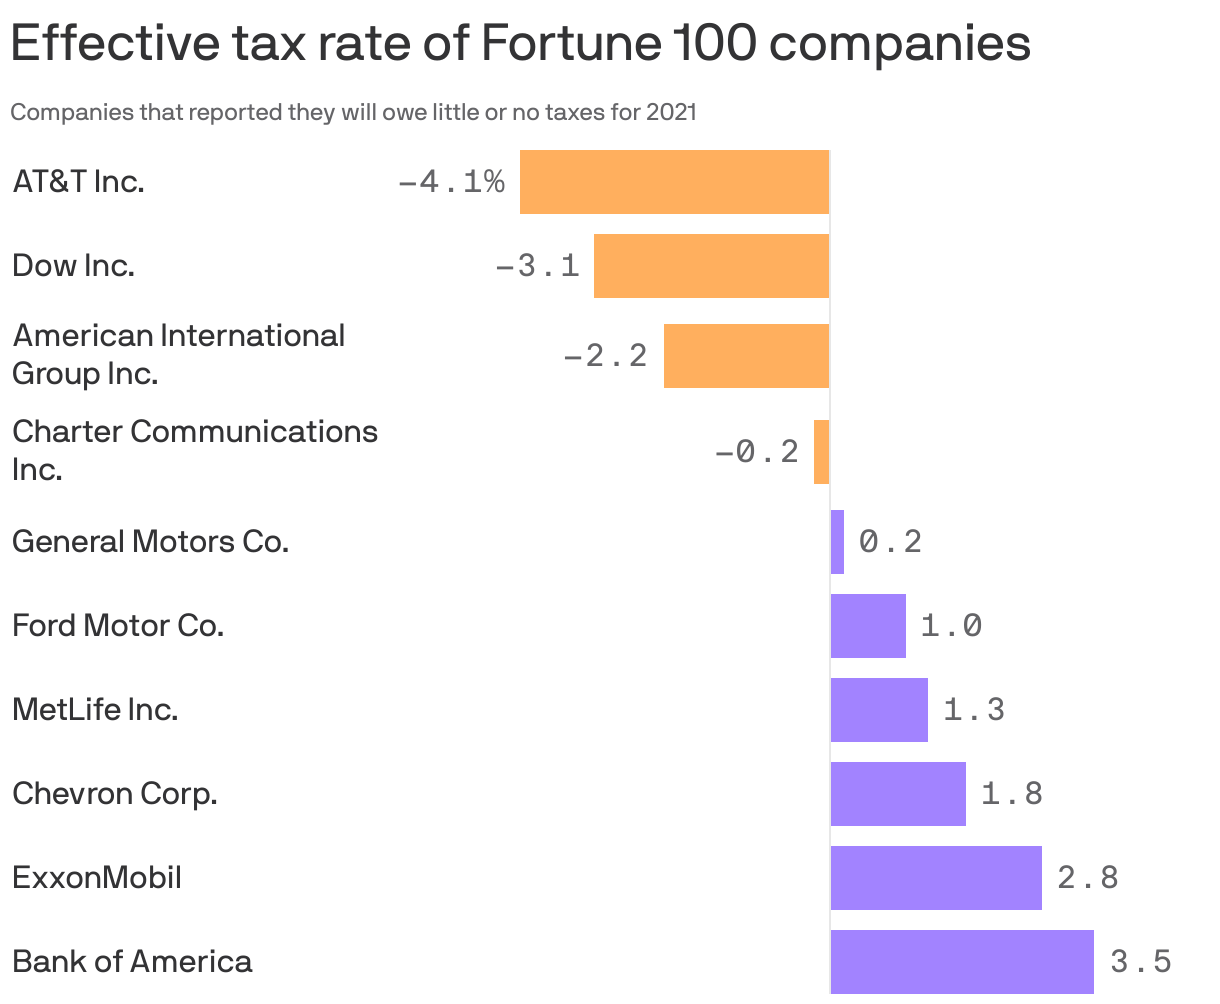 Effective tax rate of profitable Fortune 100 companies